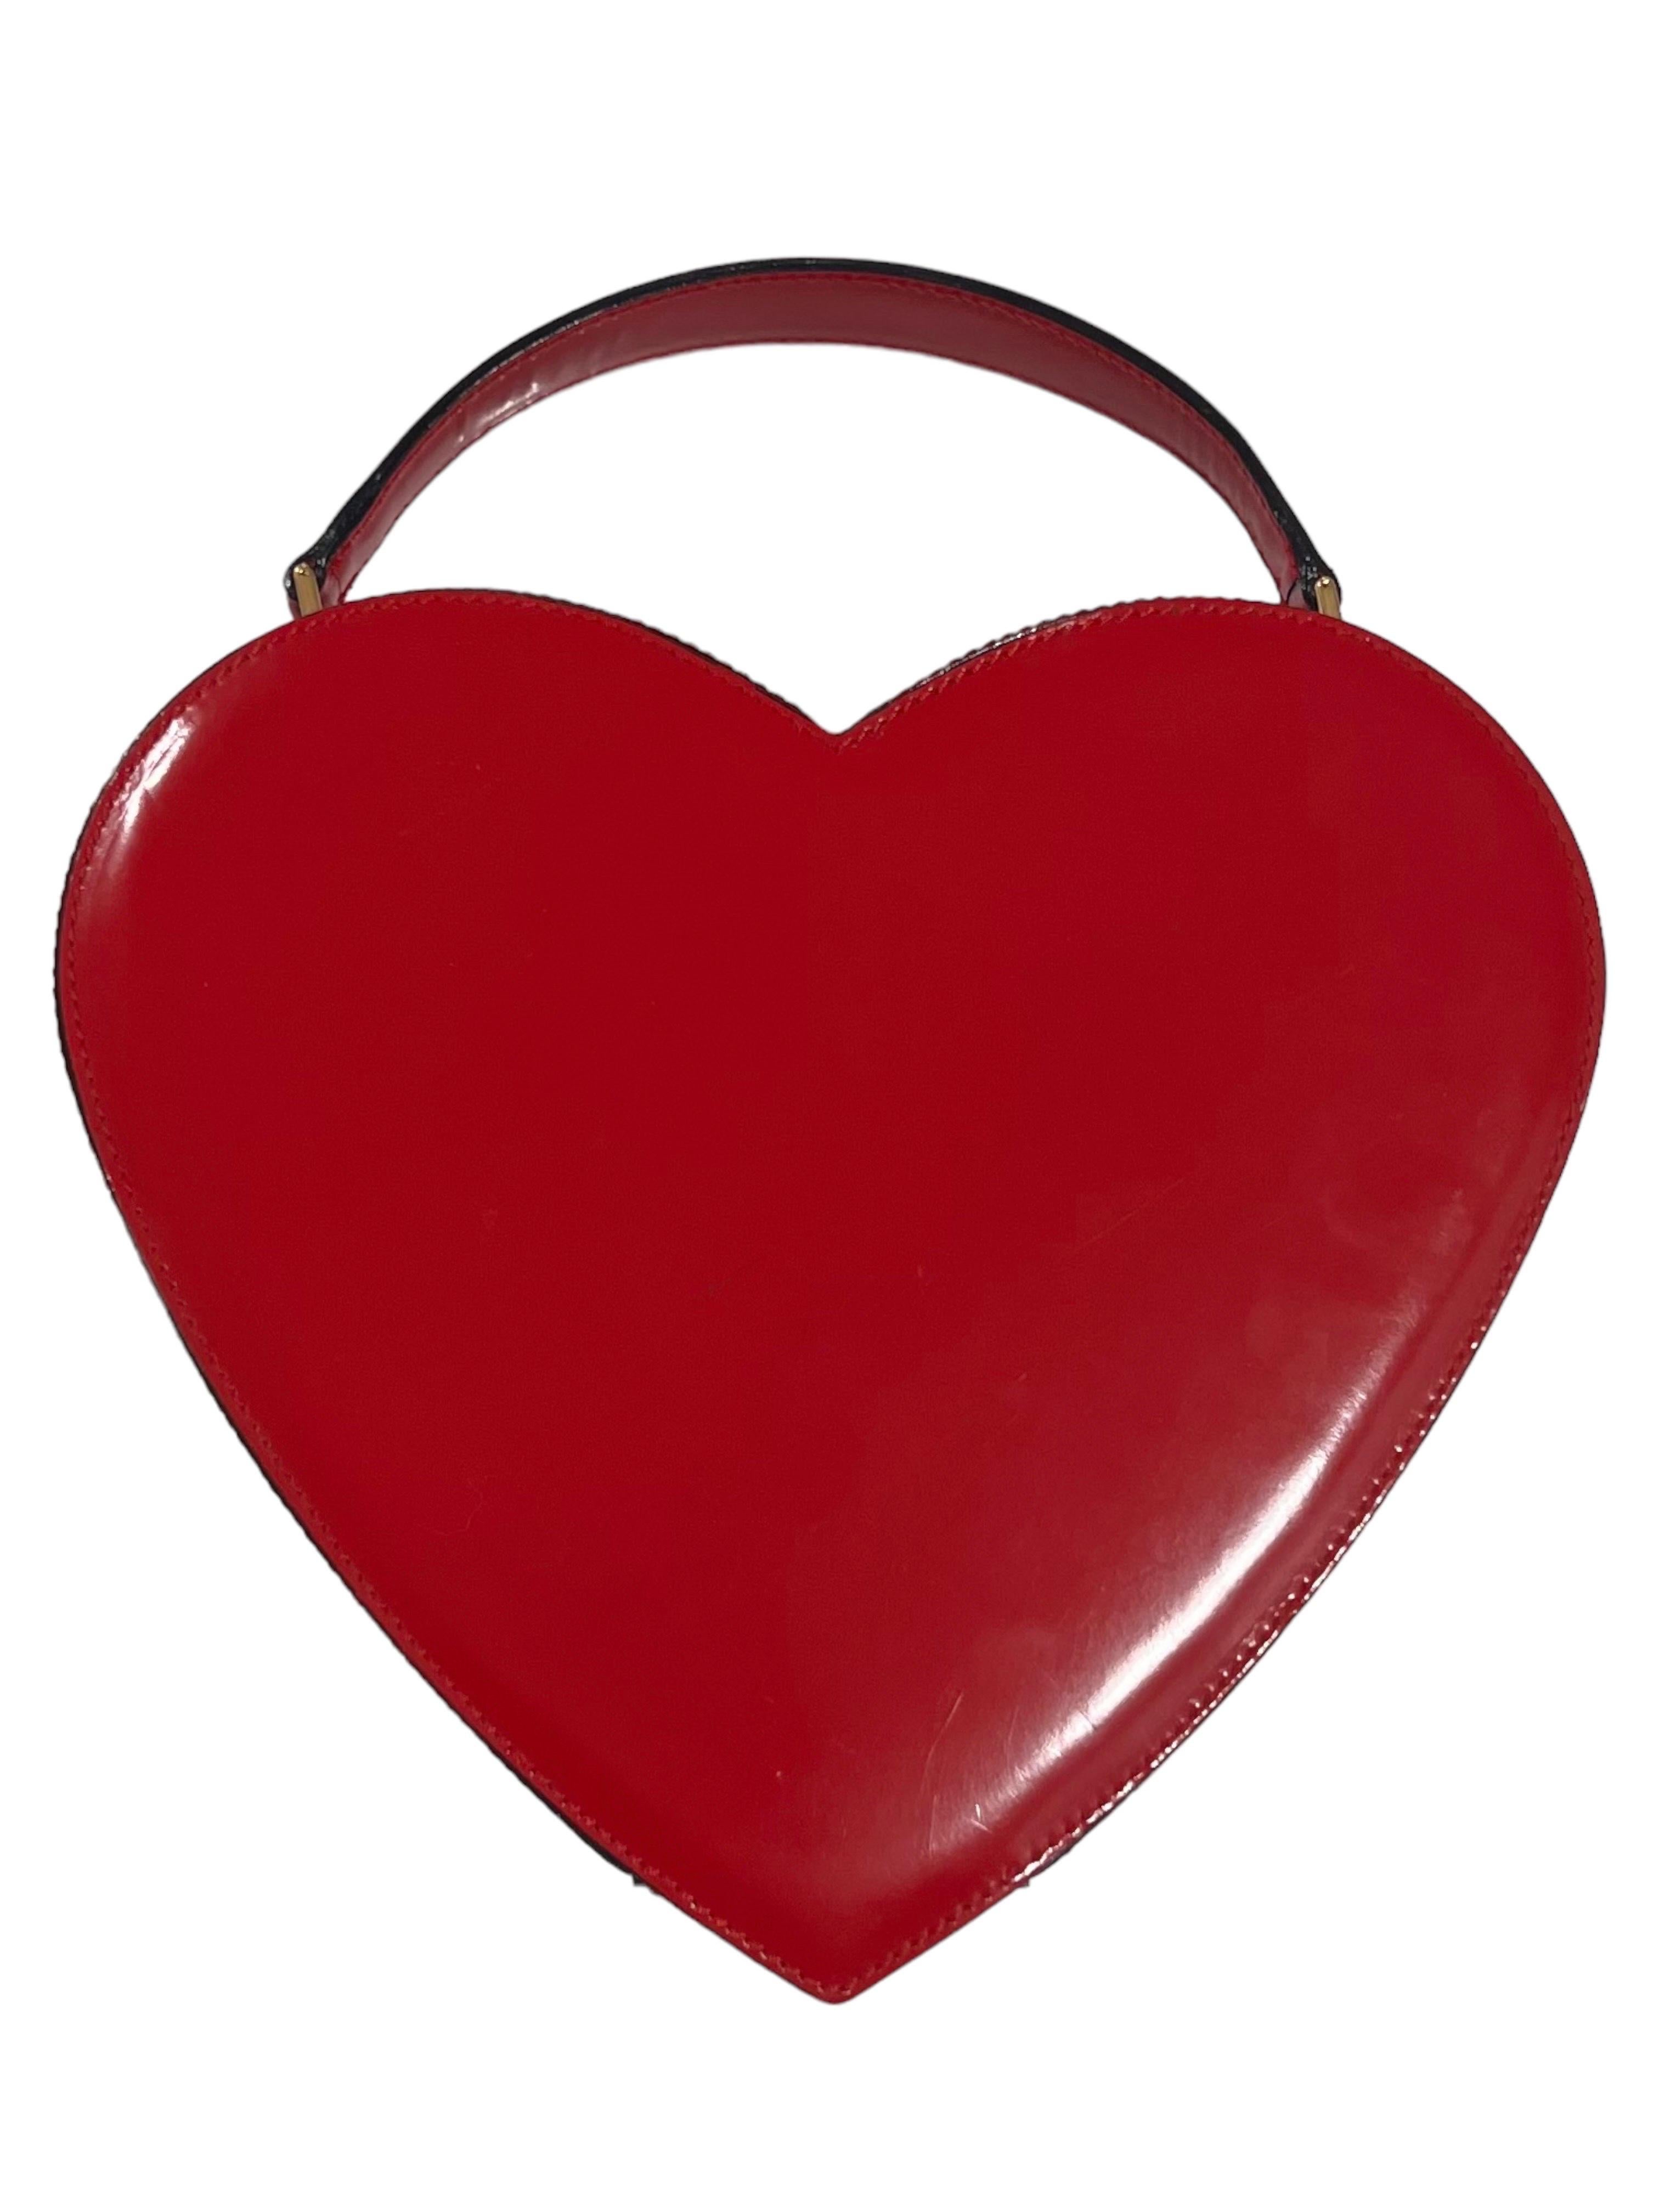 Women's 1990's Moschino Red Leather Heart Bag seen on The Nanny